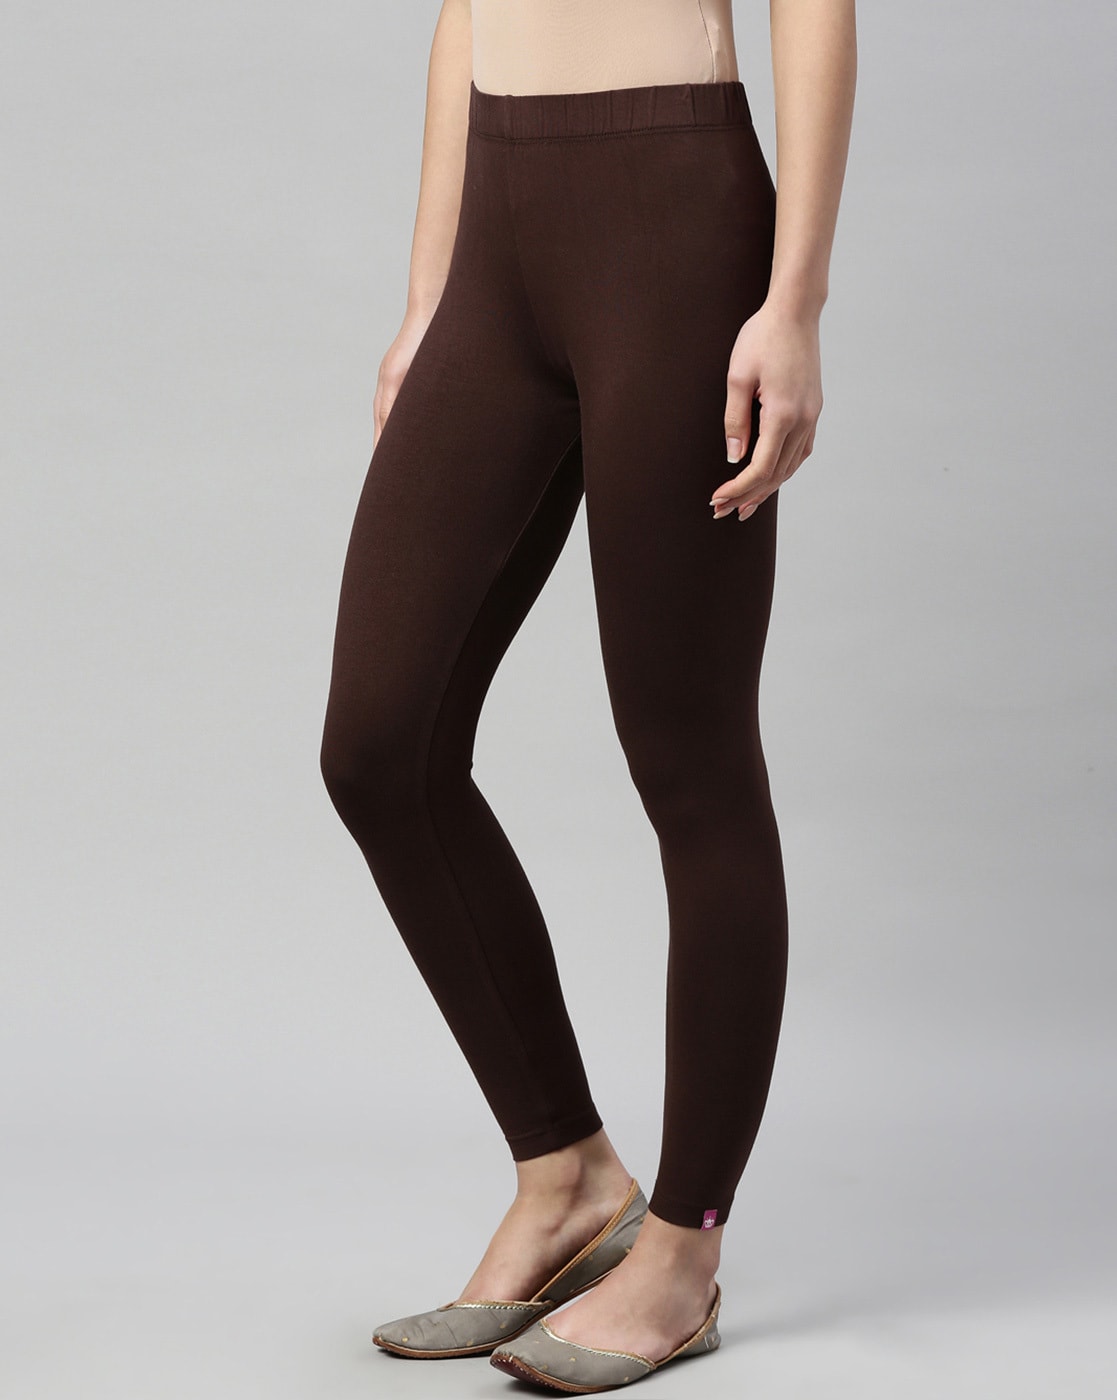 Buy Hot Chocolate Pintuck Tights Online - Shop for W